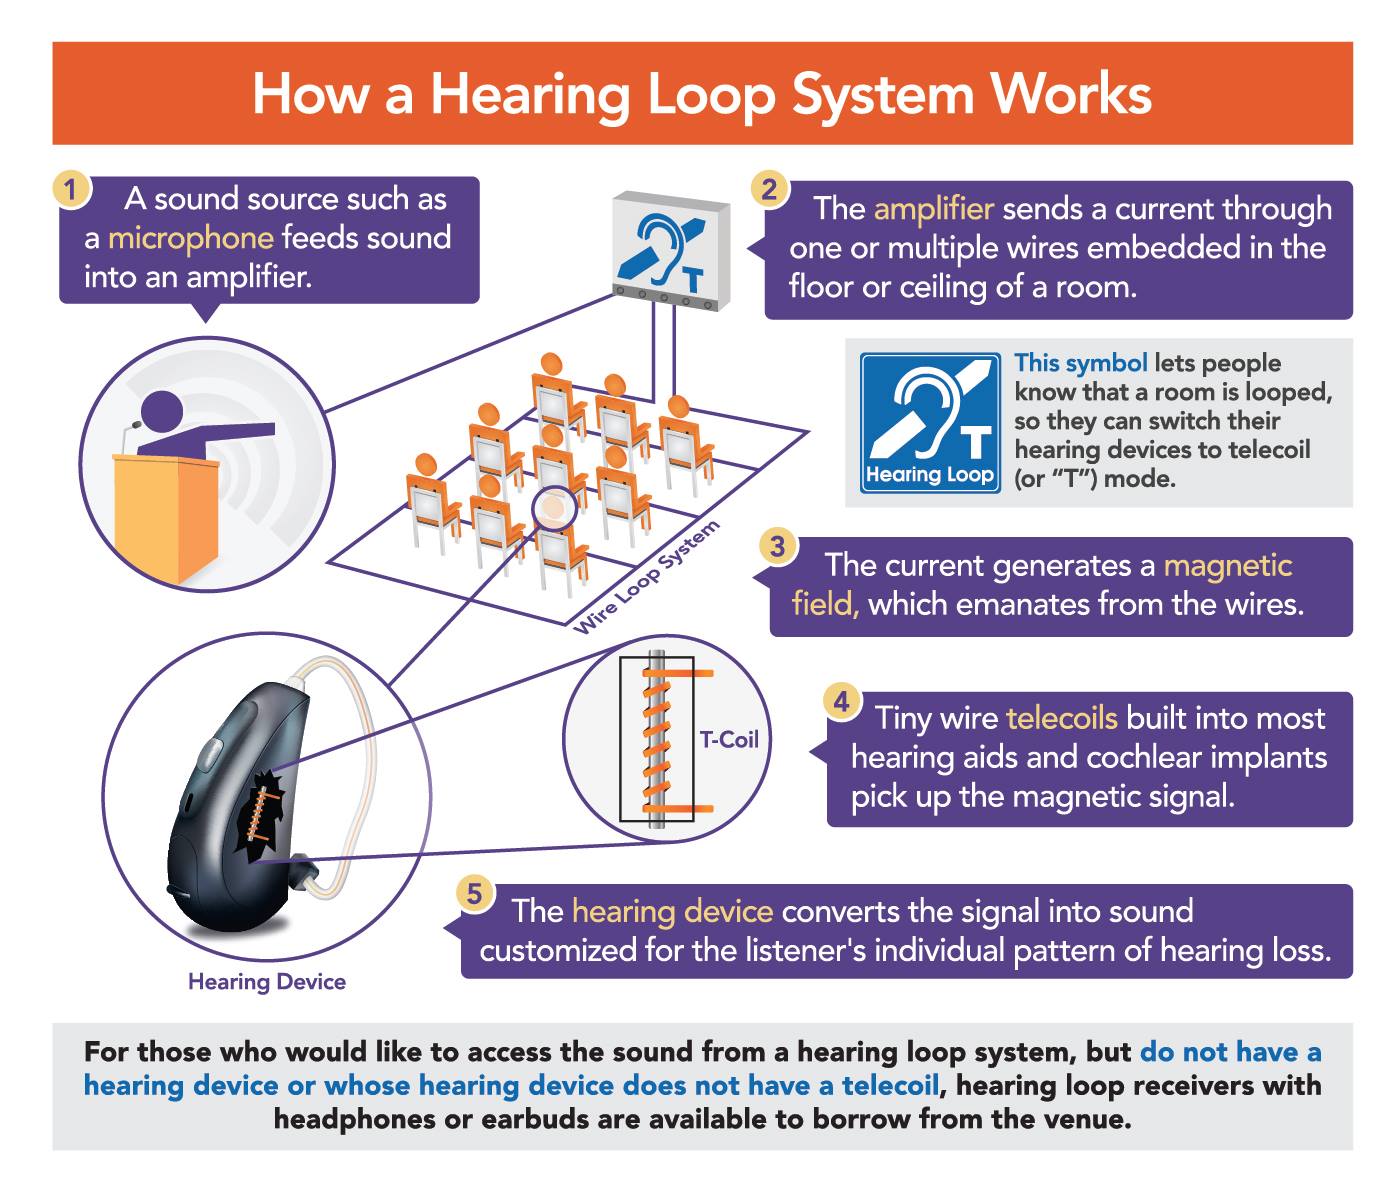 Graphic showing how a hearing loop works. 1 - A sound source such as a microphone feeds sound into an amplifier, 2 - The amplifier sends a current through one or multiple wires embedded in the floor or ceiling of a room, 3 - The current generates a magnetic field, which emanates from the loop., 4 - Tiny wire t-coils built into the hearing aids pick up the magnetic signal, 5 - The hearing aid converts the signal into sound customized for the listener's individual pattern of hearing loss.